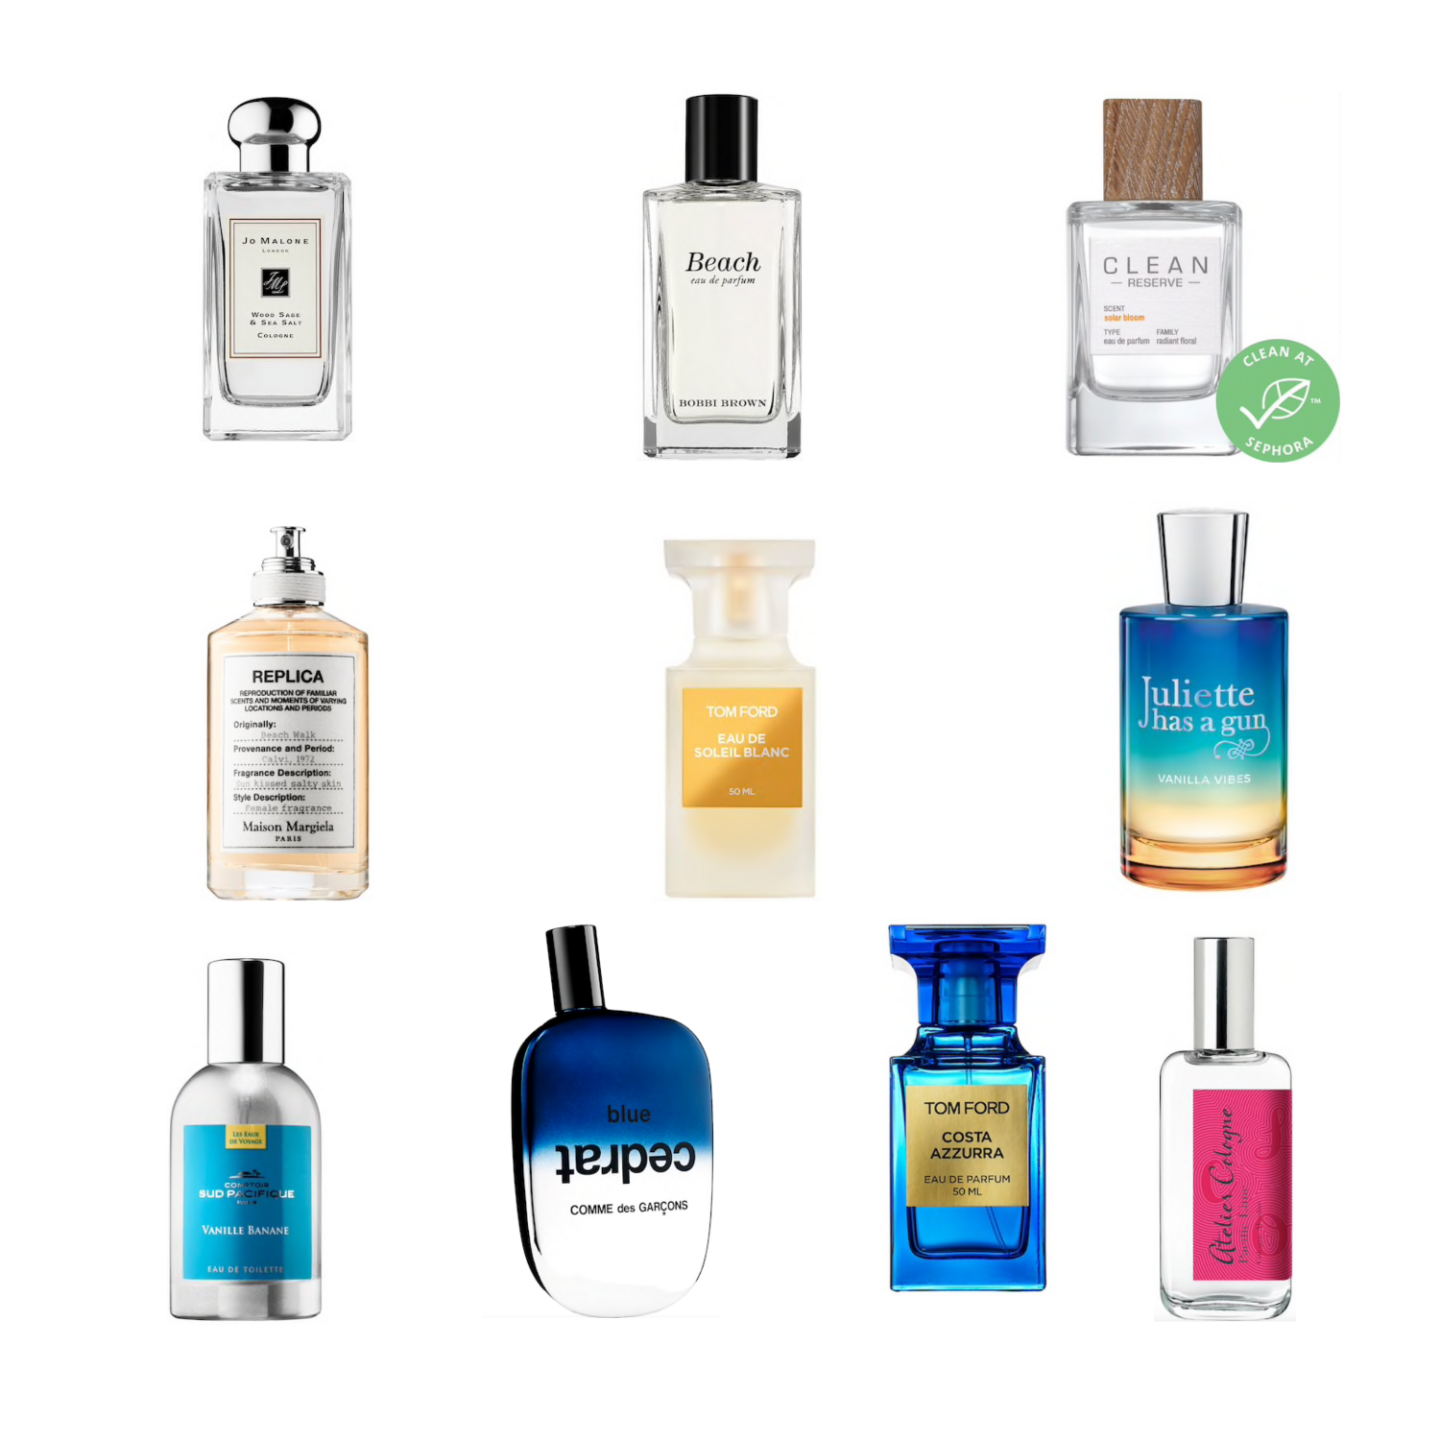 Top 10 Beach Scents for Summer at Sephora | TIFF BENSON